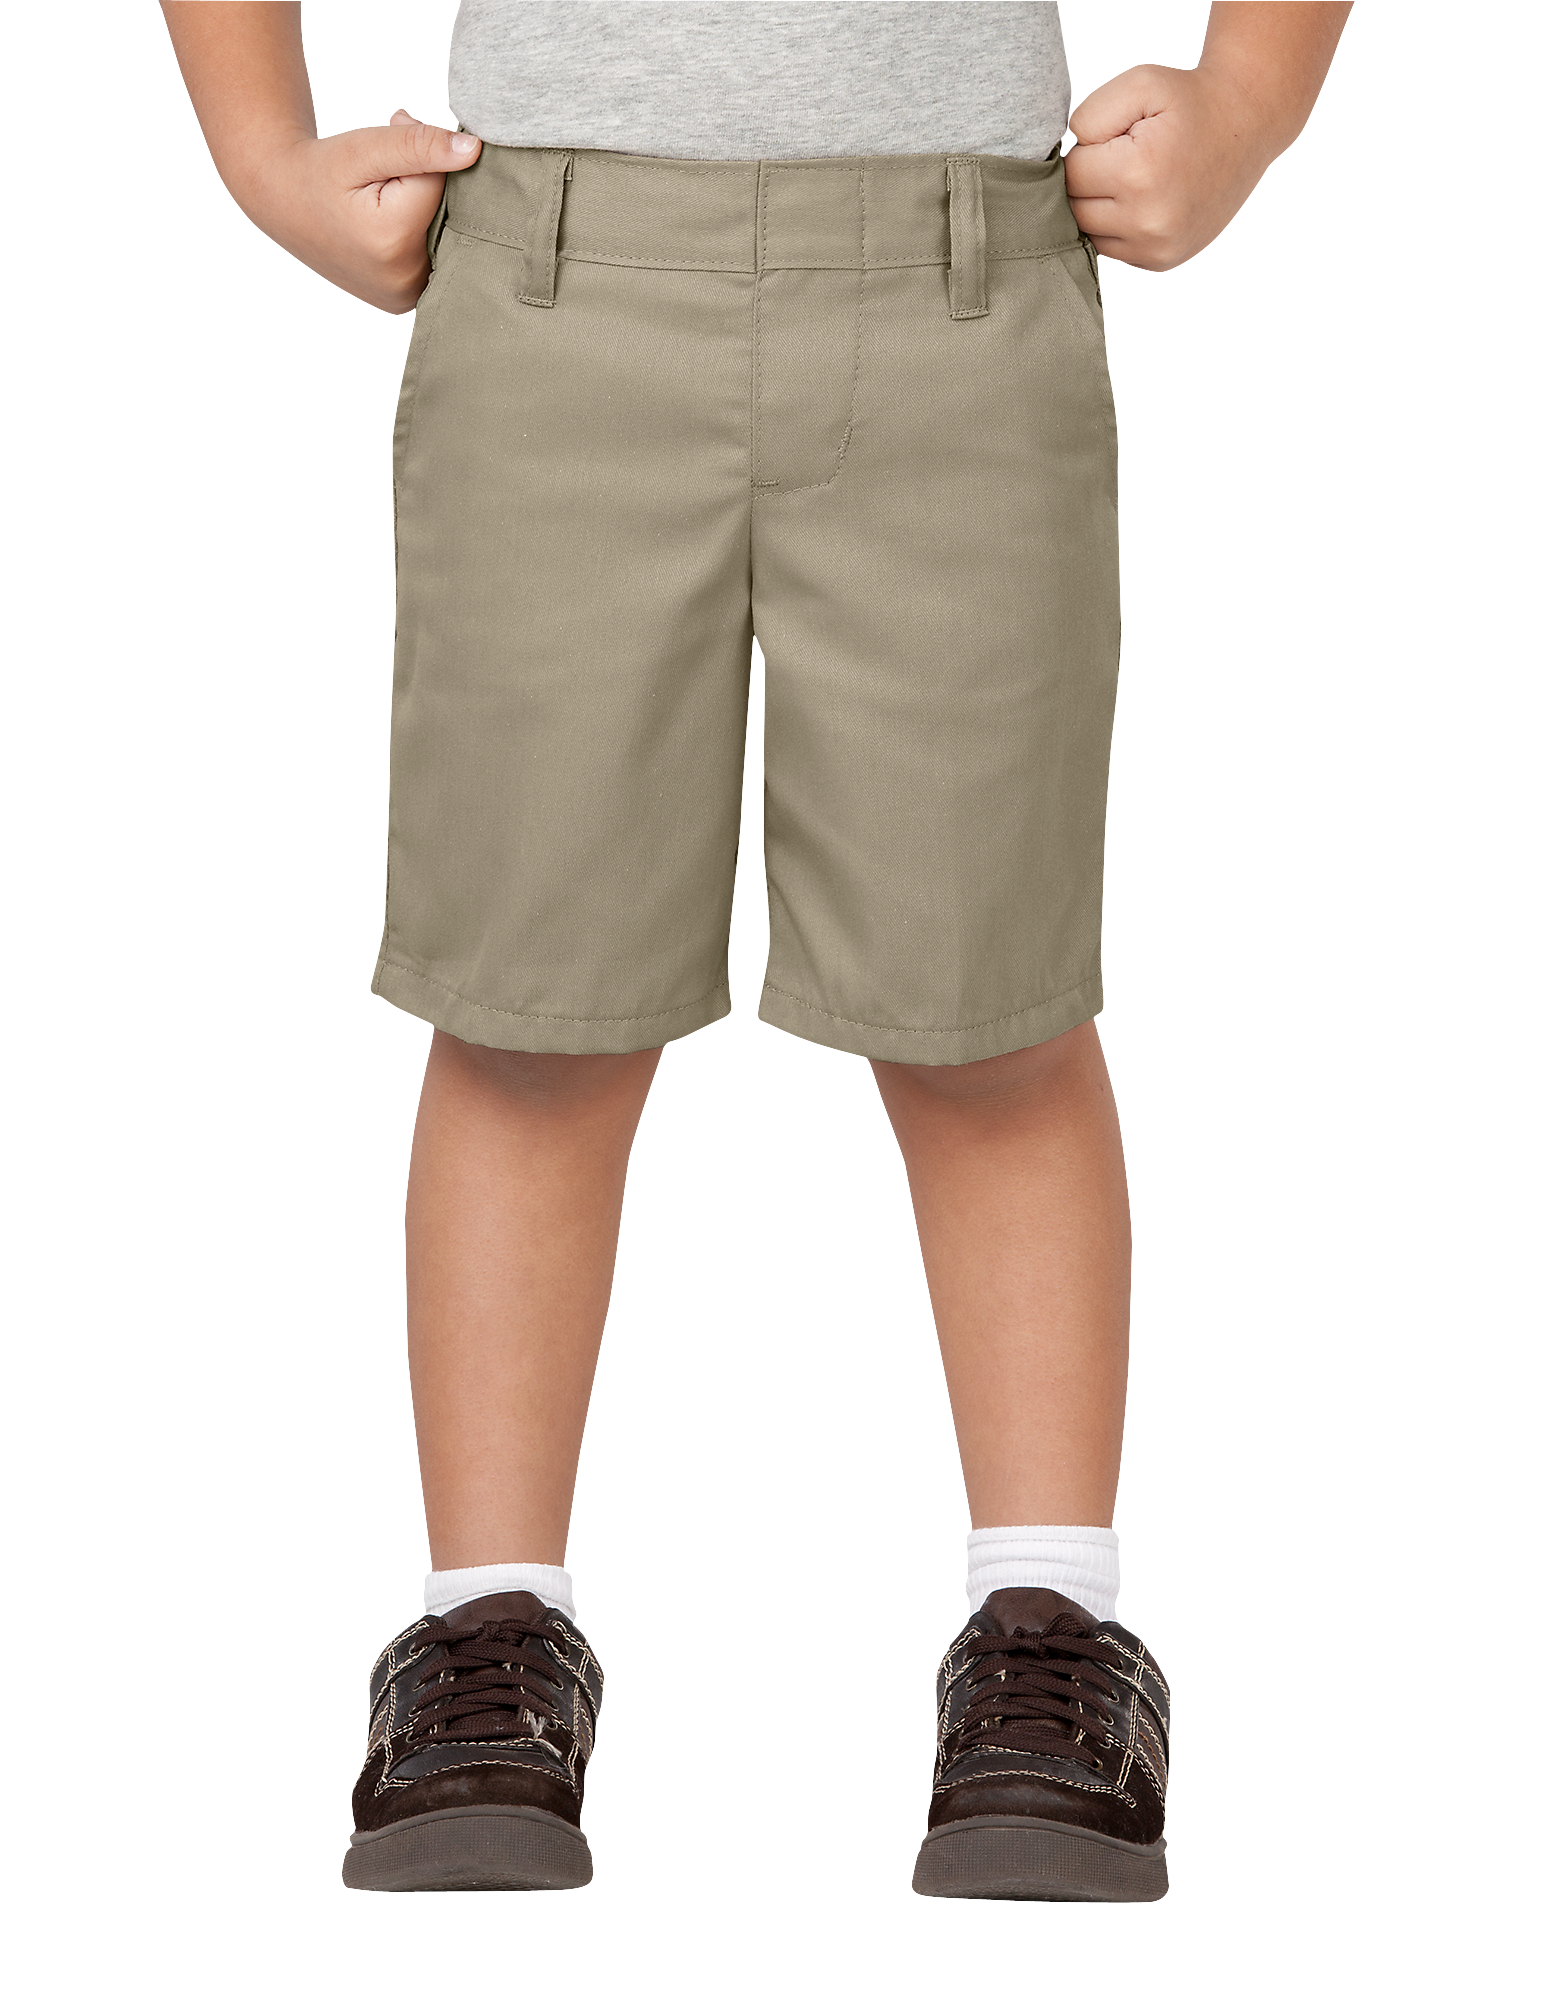 khaki pants for toddlers